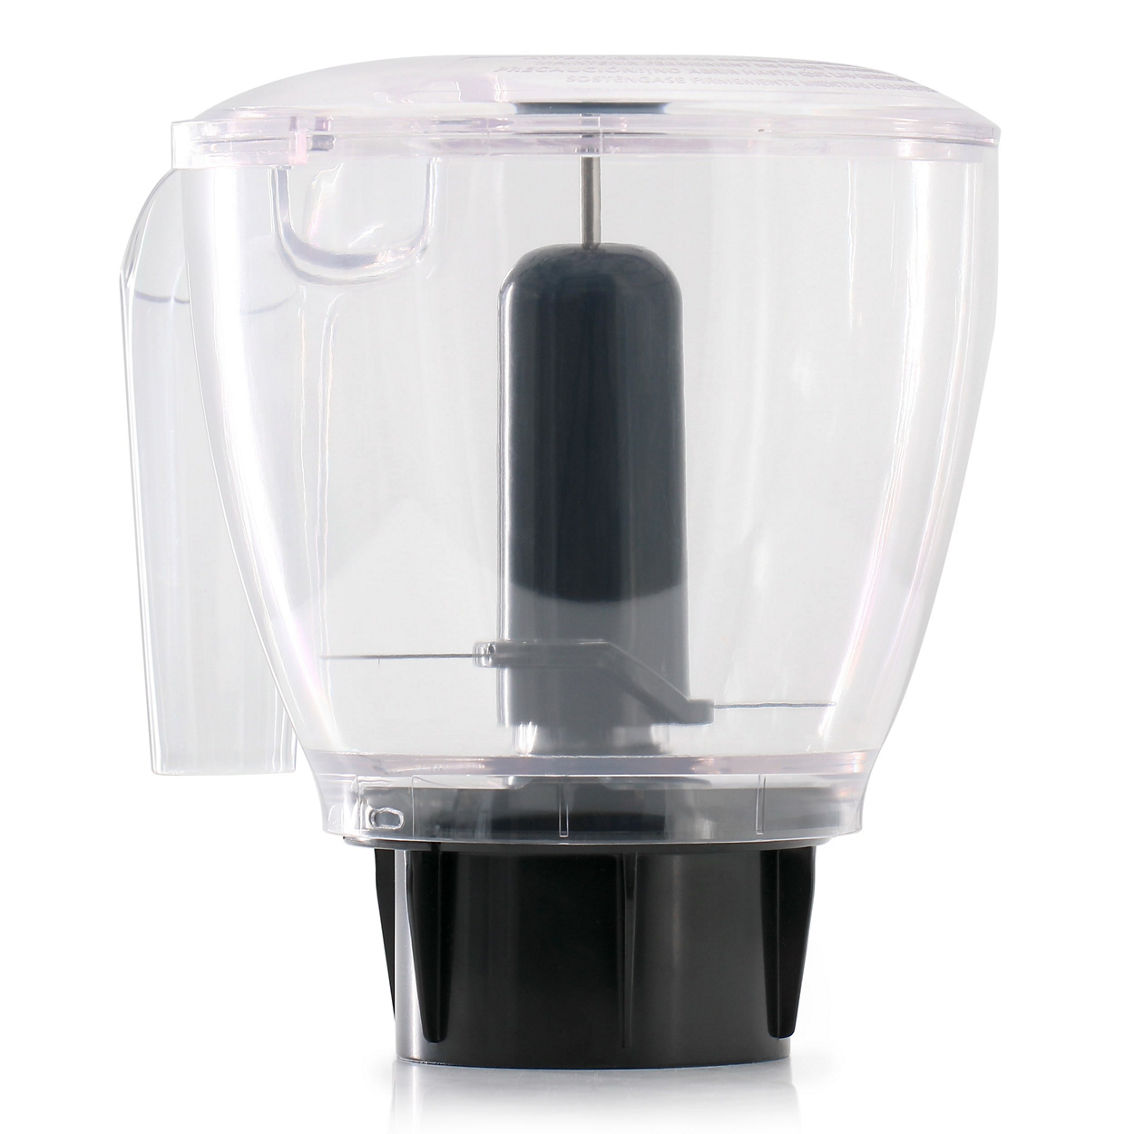 Oster 3-in-1 Kitchen System 700 Watt Blender with Blend-N-Go Cup in Chrome - Image 4 of 5